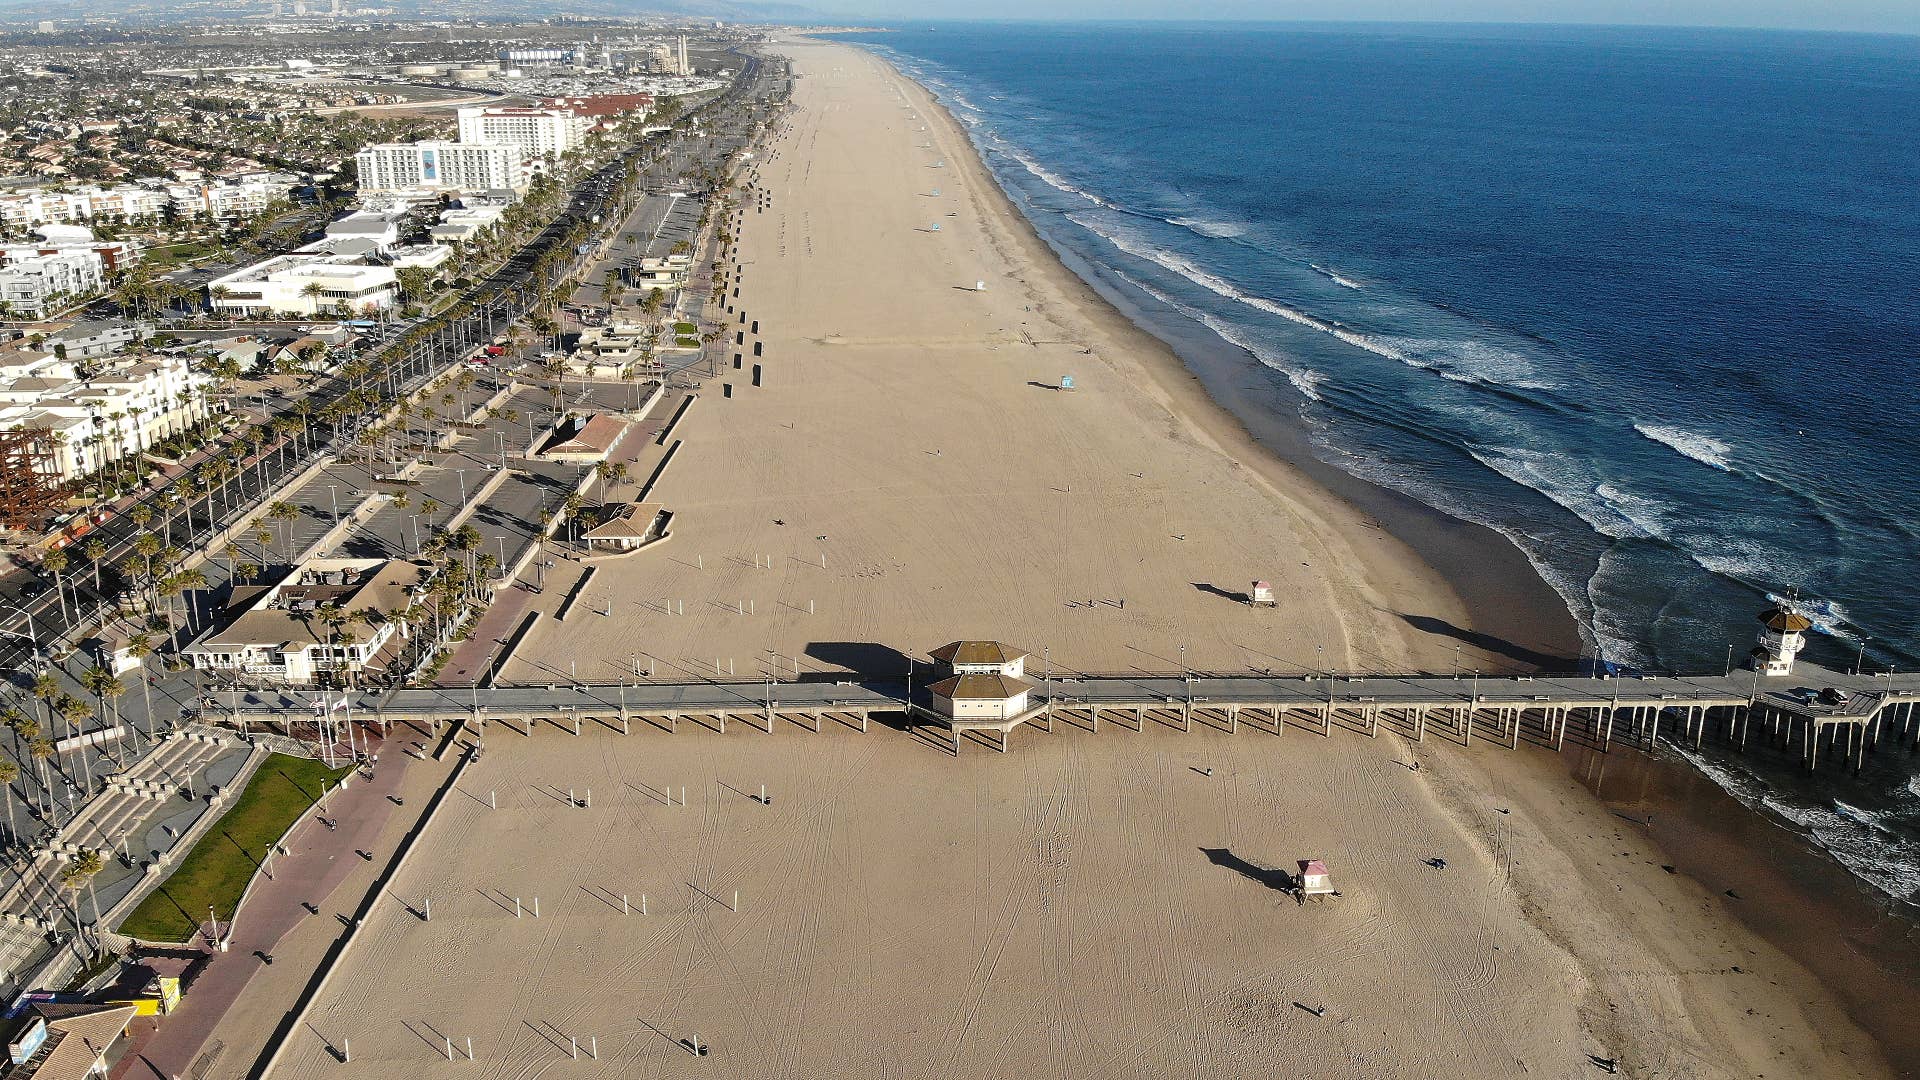 An aerial view of Huntington Beach and its shuttered pier amid the coronavirus pandemic.